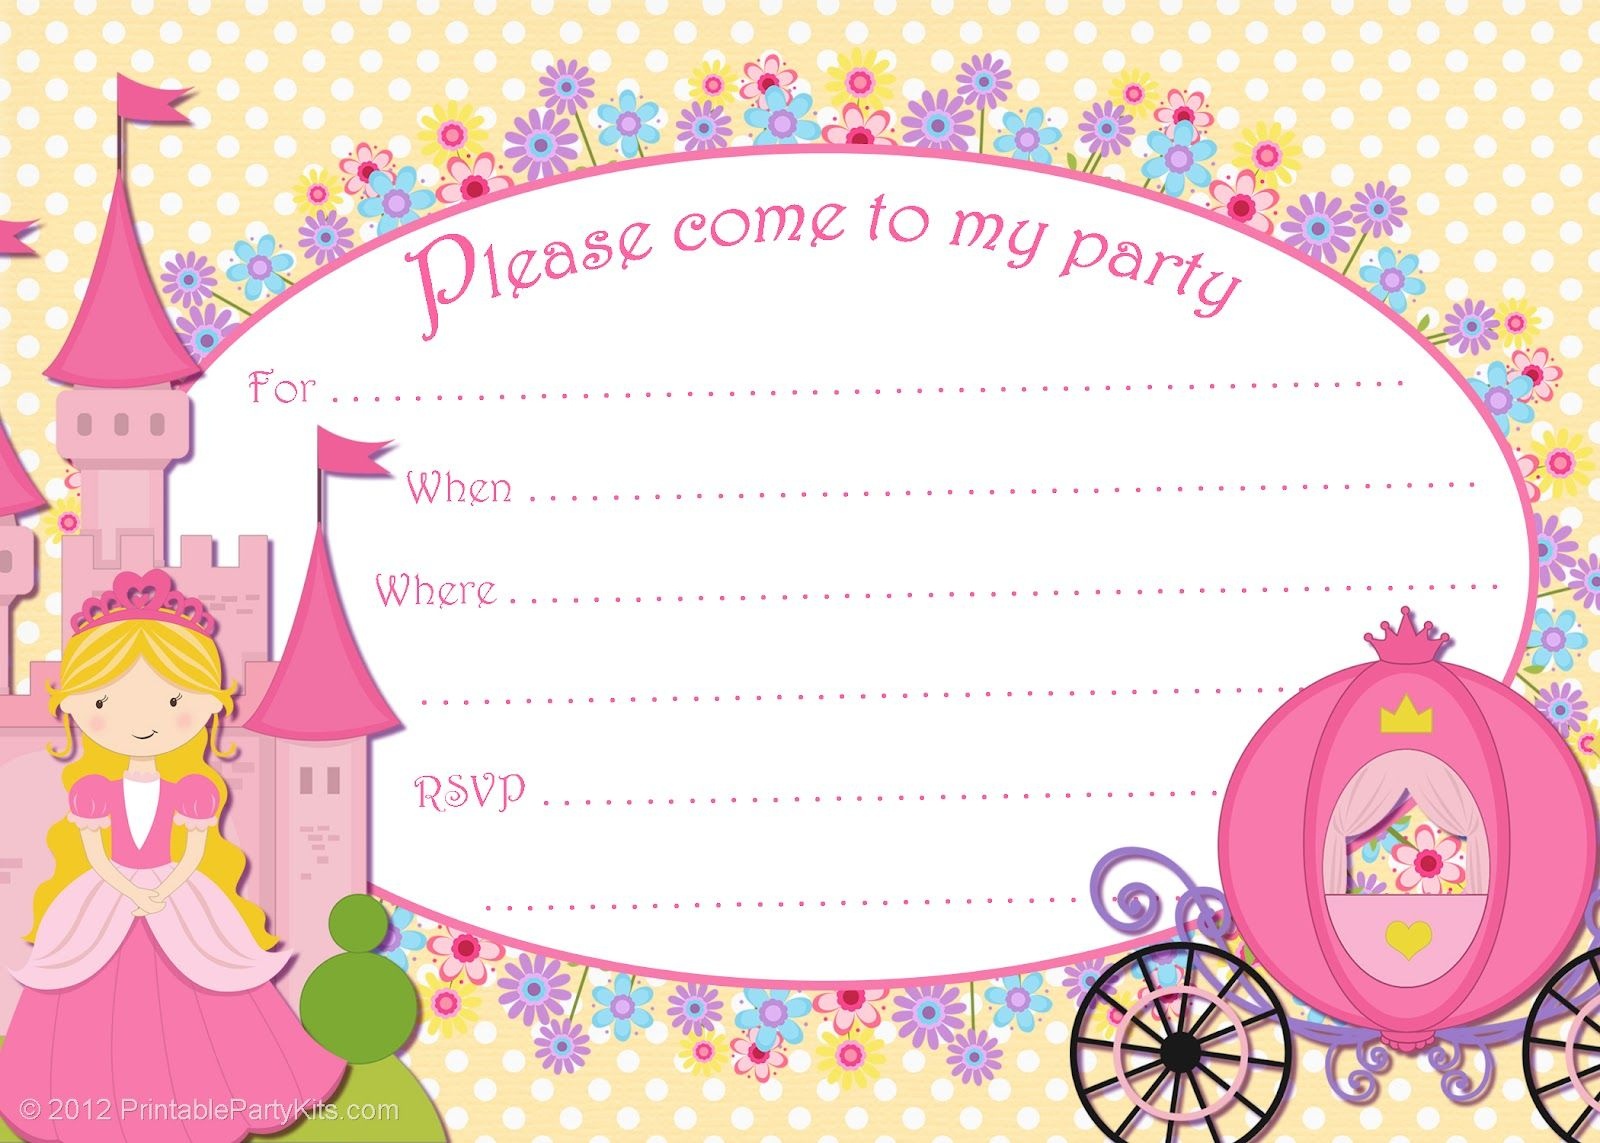 Free Printable Party Invitations Templates | Click On The Free - Free Printable Princess Invitation Cards